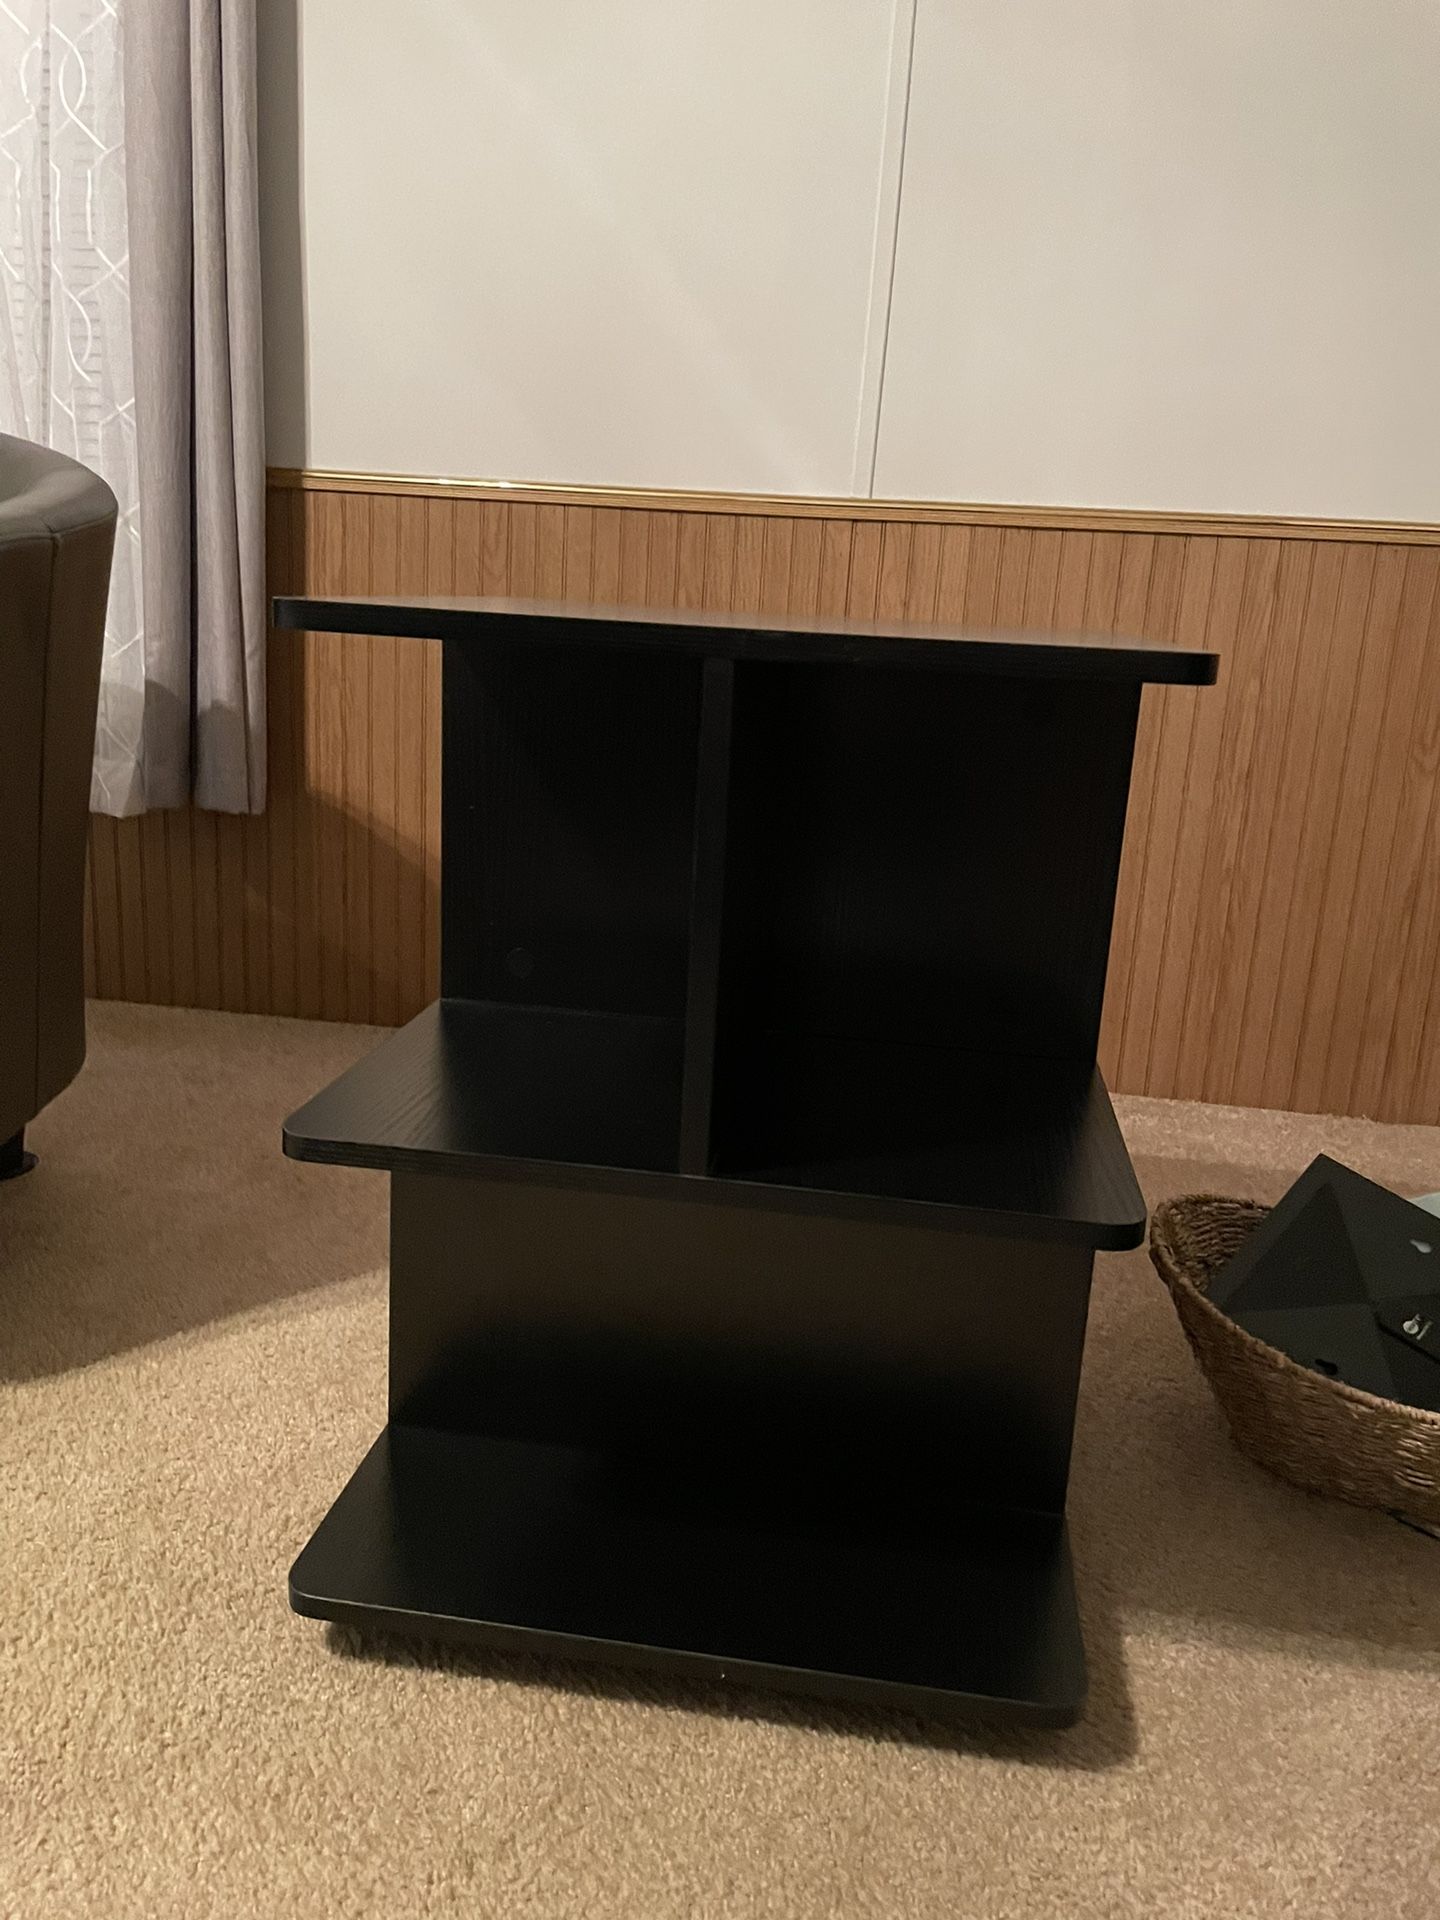 Downsizing  Black Bookshelves  Can Use Night Stand Or End Table